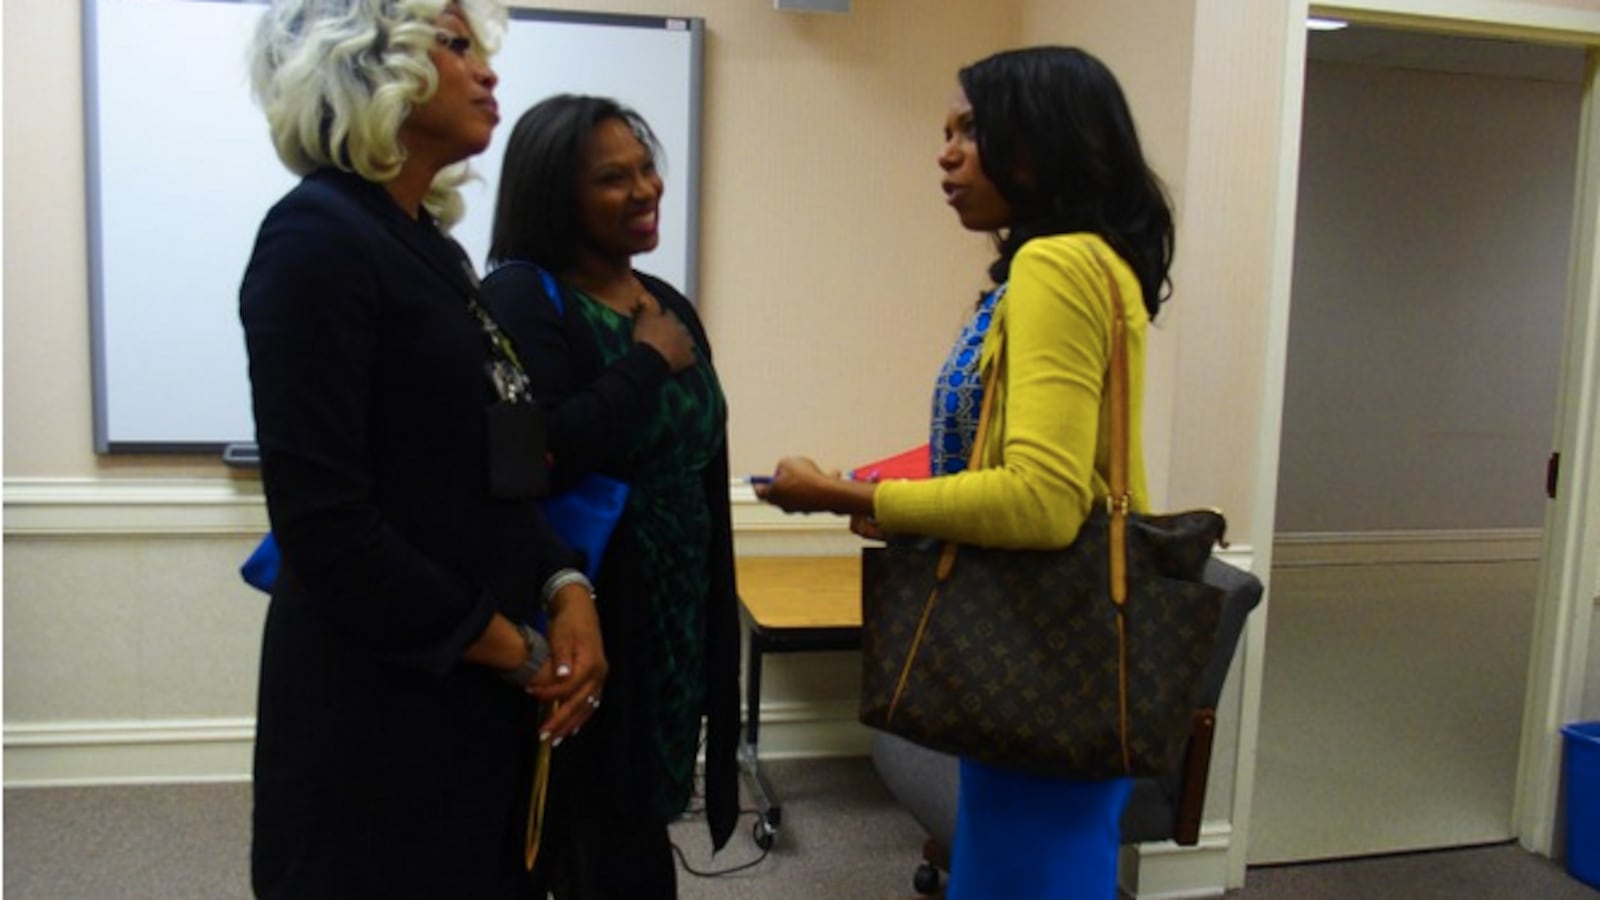 From left: Sharon Griffin, regional superintendent of the Innovation Zone in Memphis, speaks with iZone adviser Ashleigh Dennis and Kameelah Shaheed-Diallo, a vice president with The Mind Trust, a nonprofit education organization based in Indianapolis.